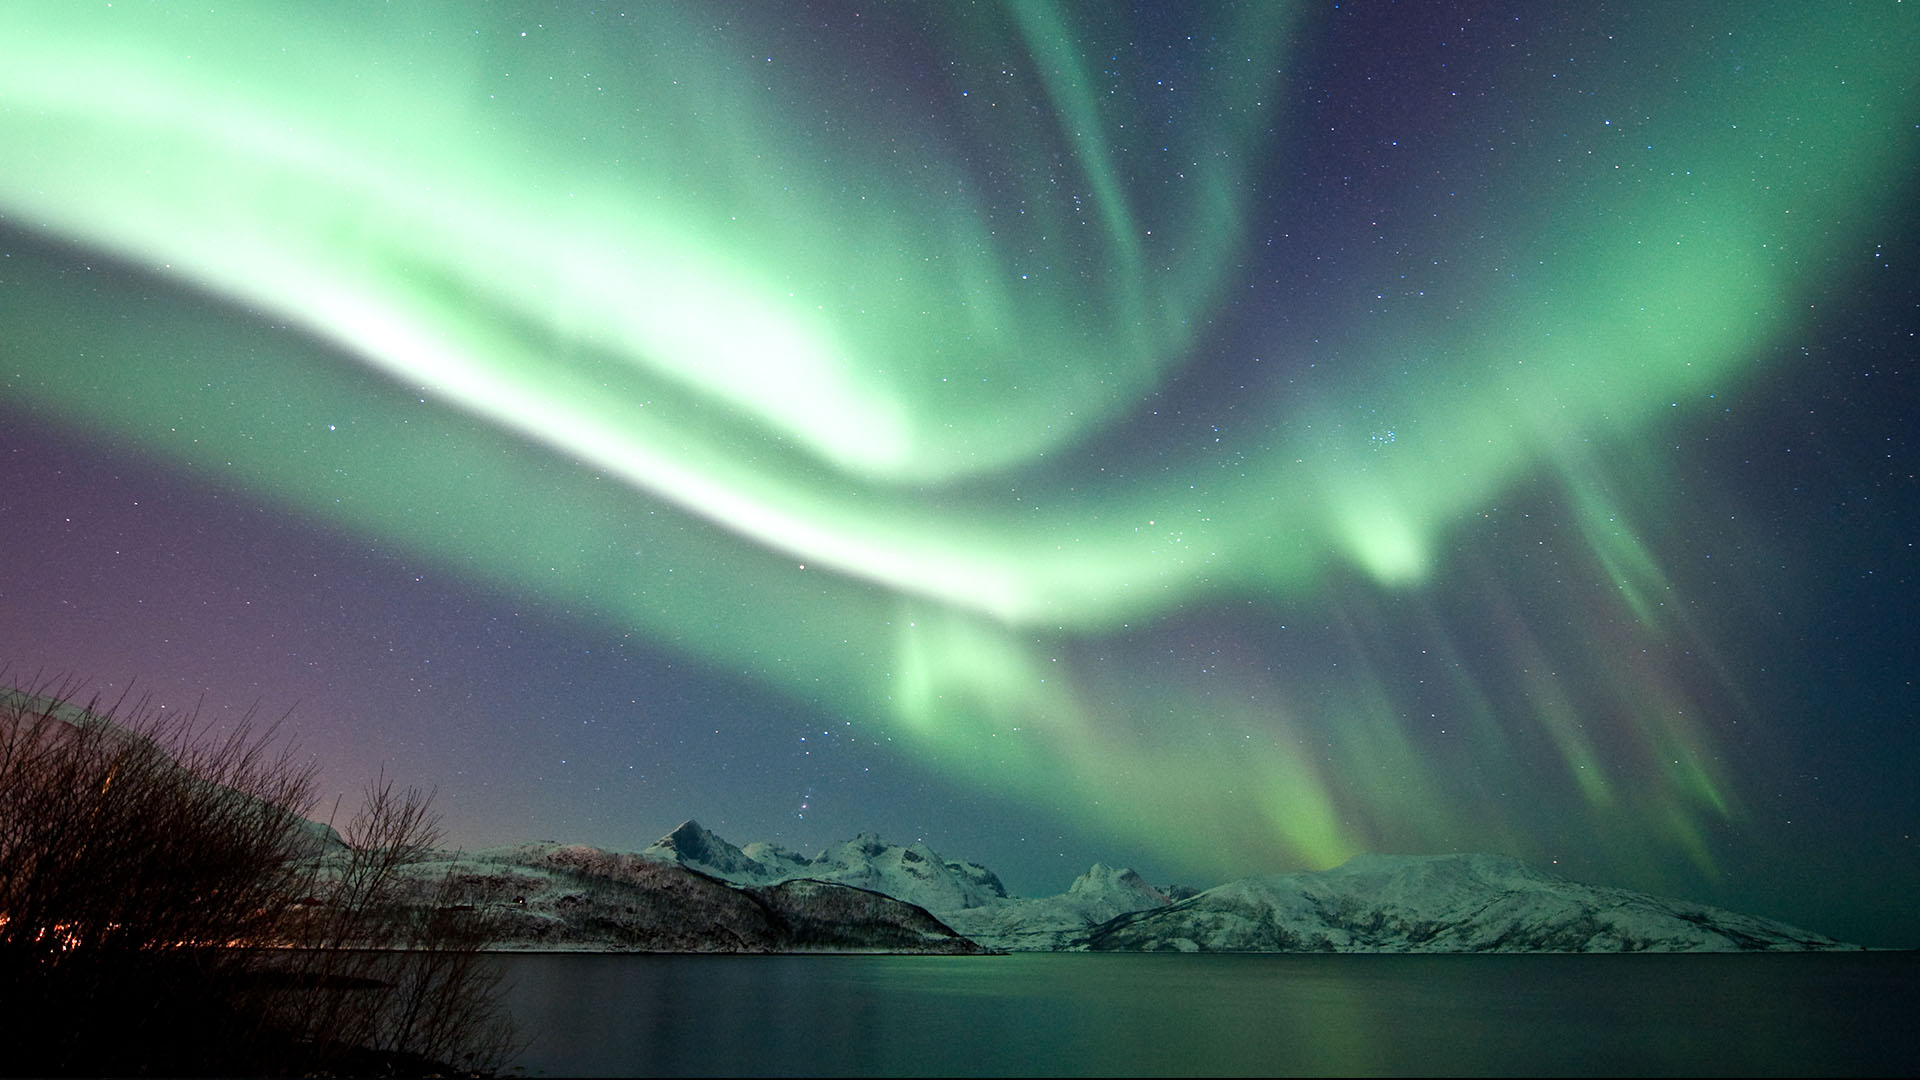 Best Time & Place to See Northern Lights in Norway